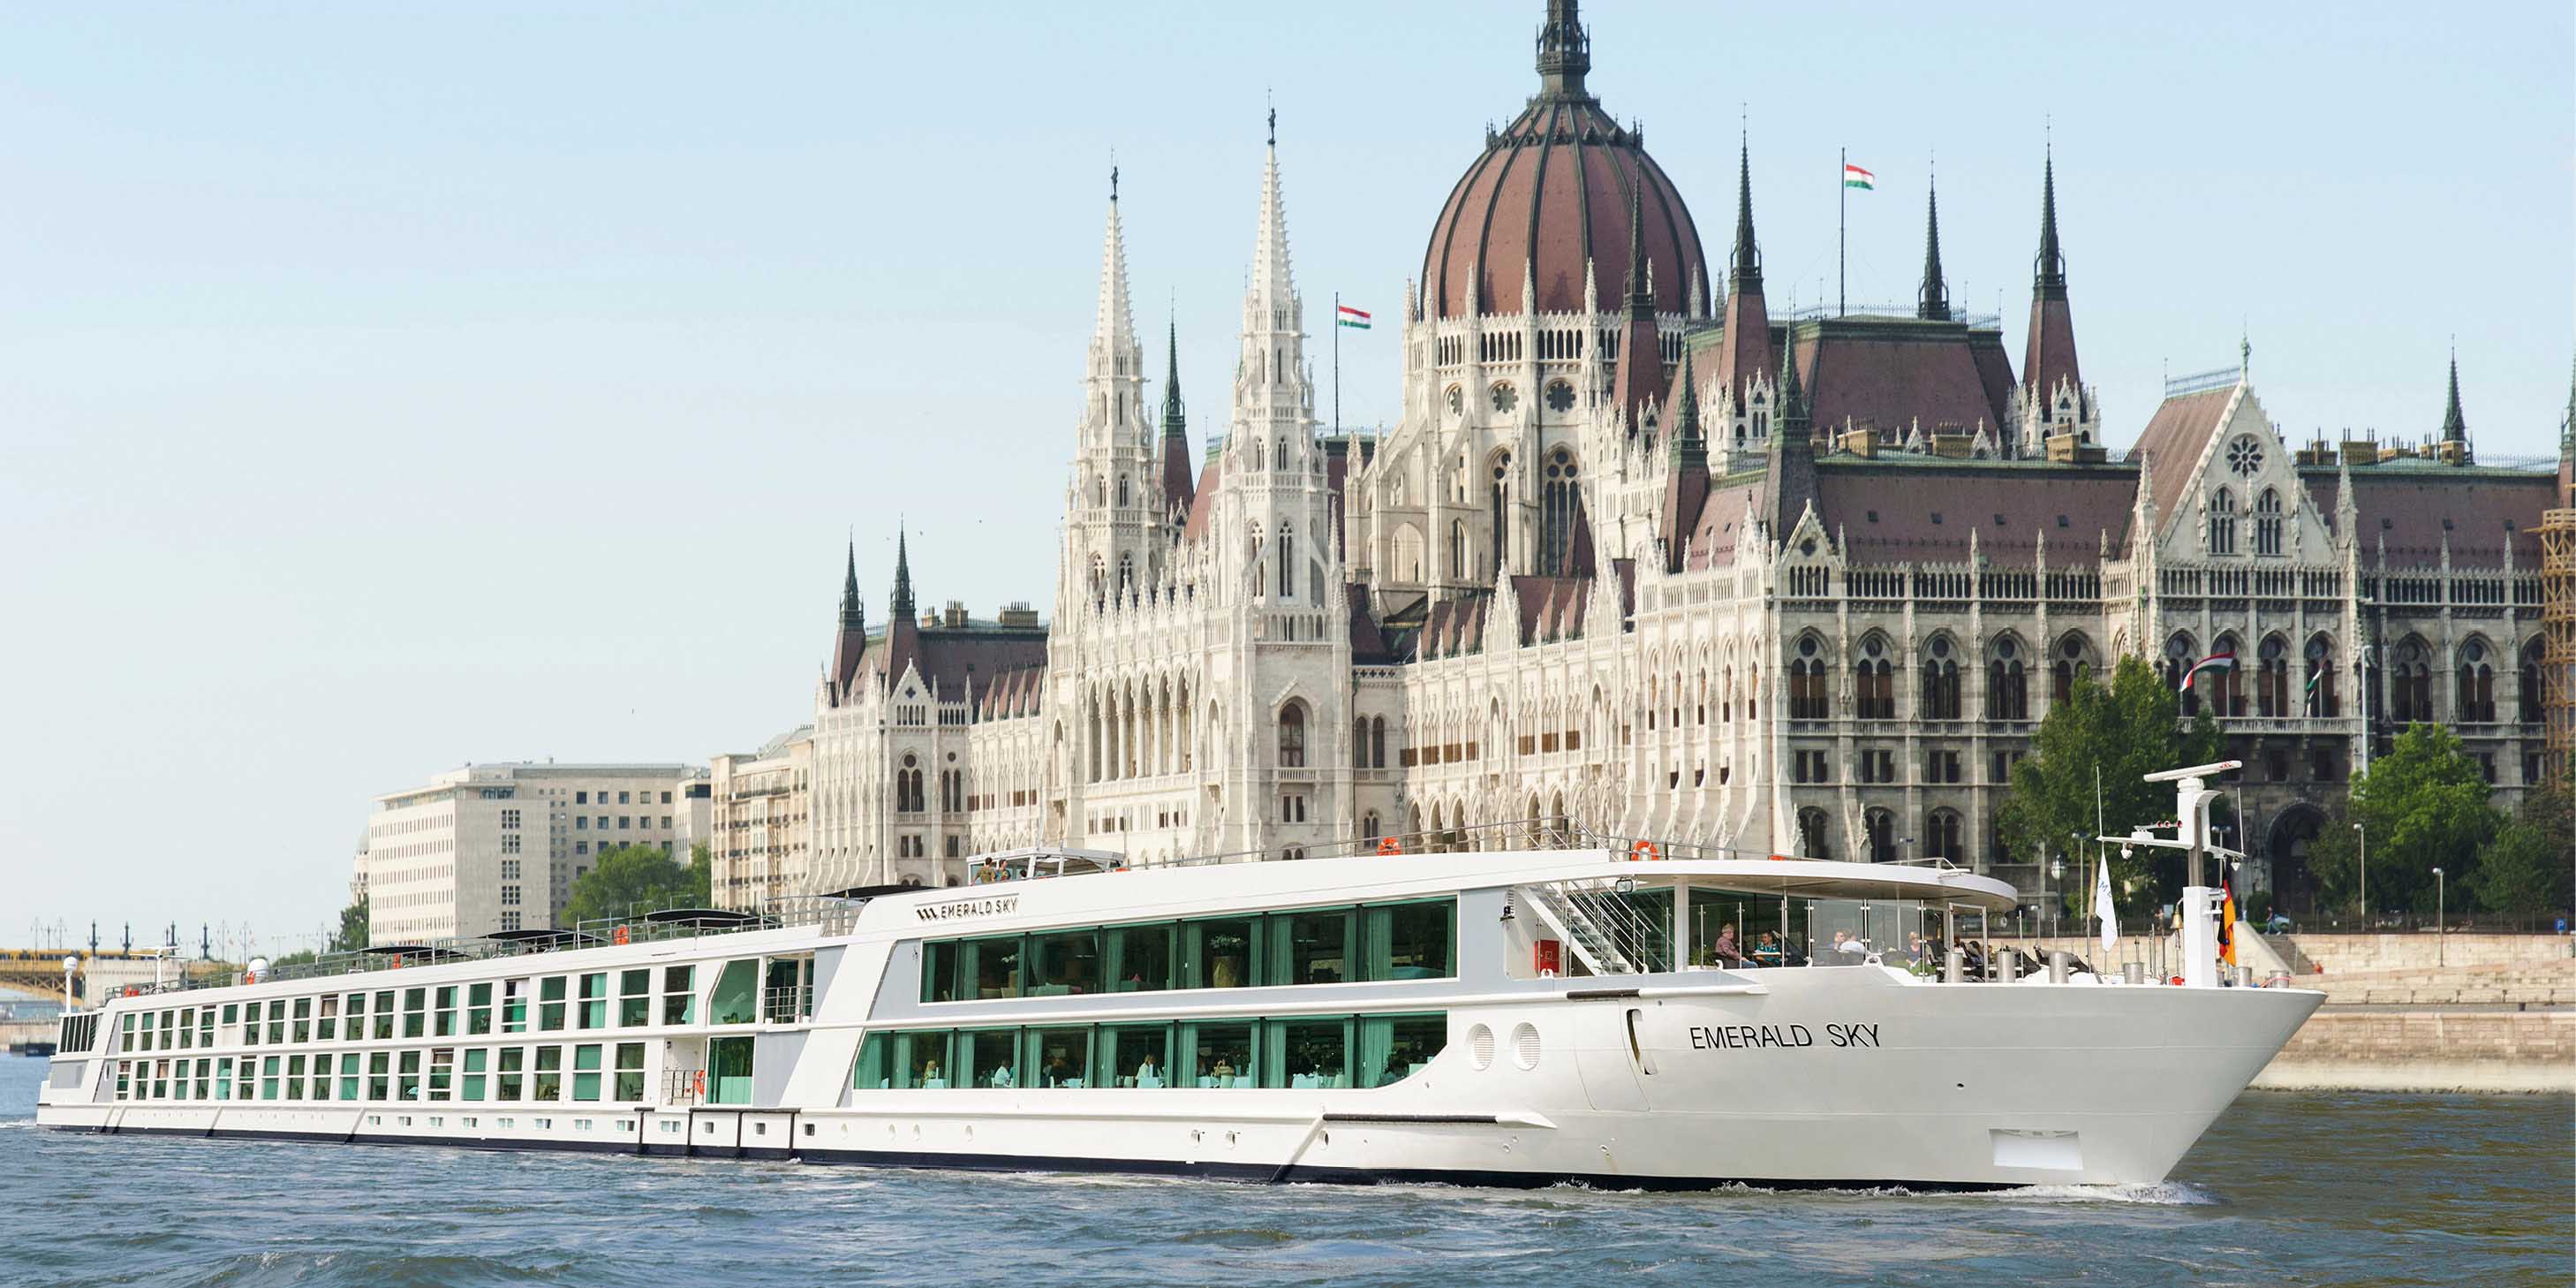 Luxury cruise ship sailing the Danube River past the Hungarian Parliament Building in Budapest